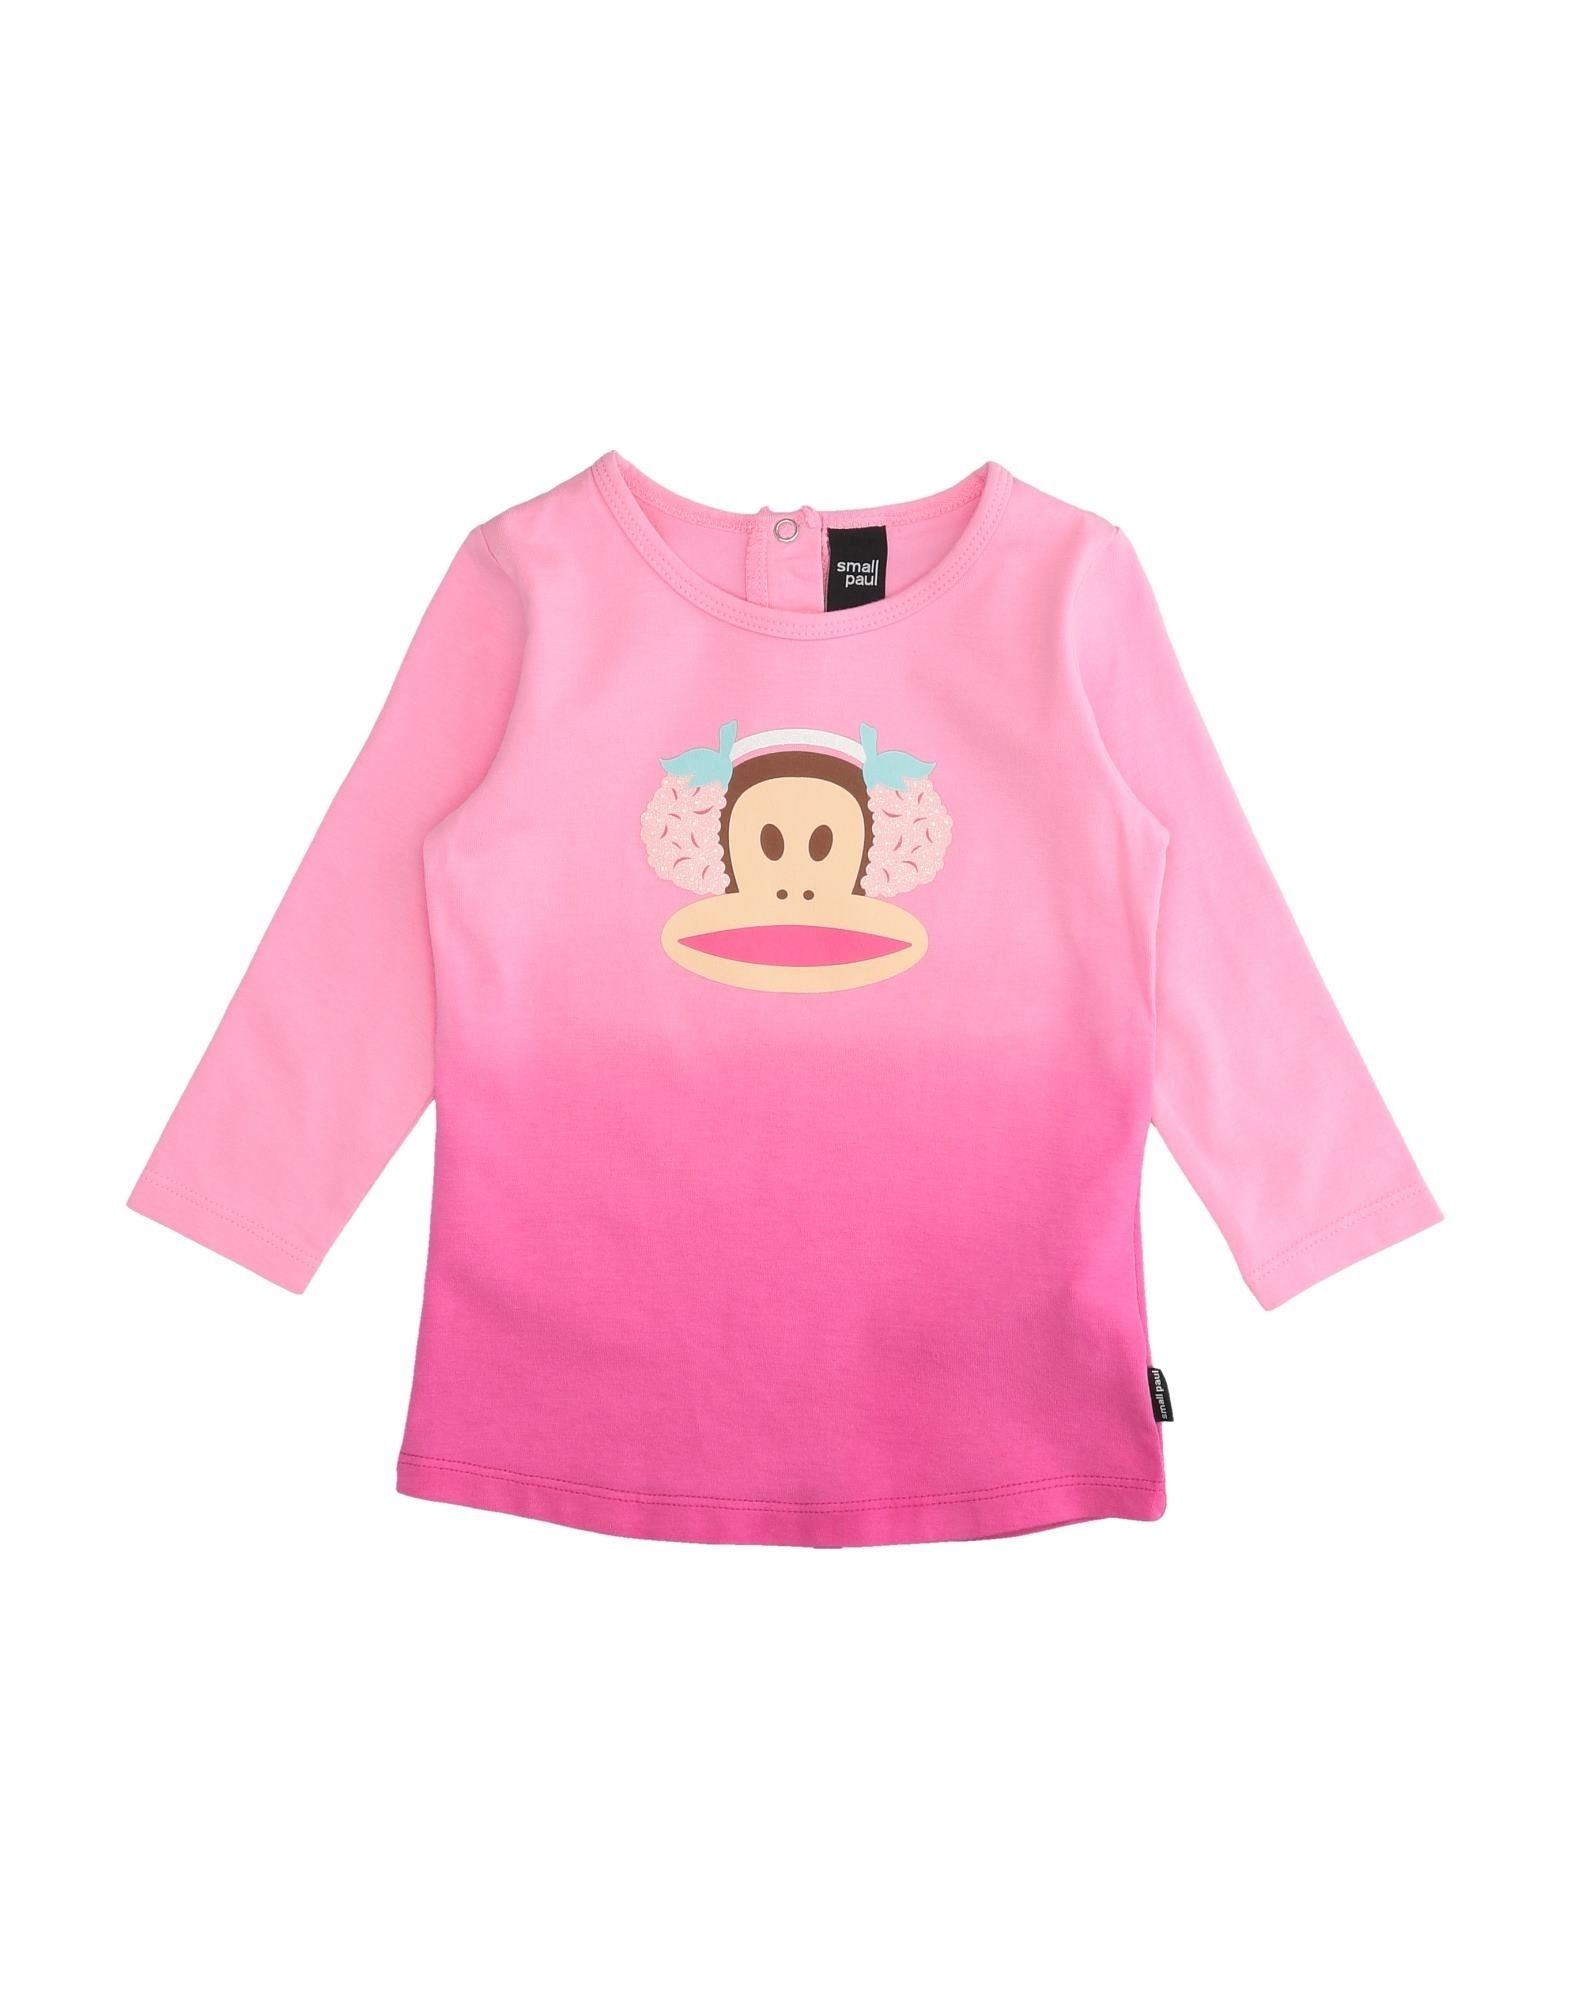 Small Paul By Paul Frank Kids' T-shirts In Pink